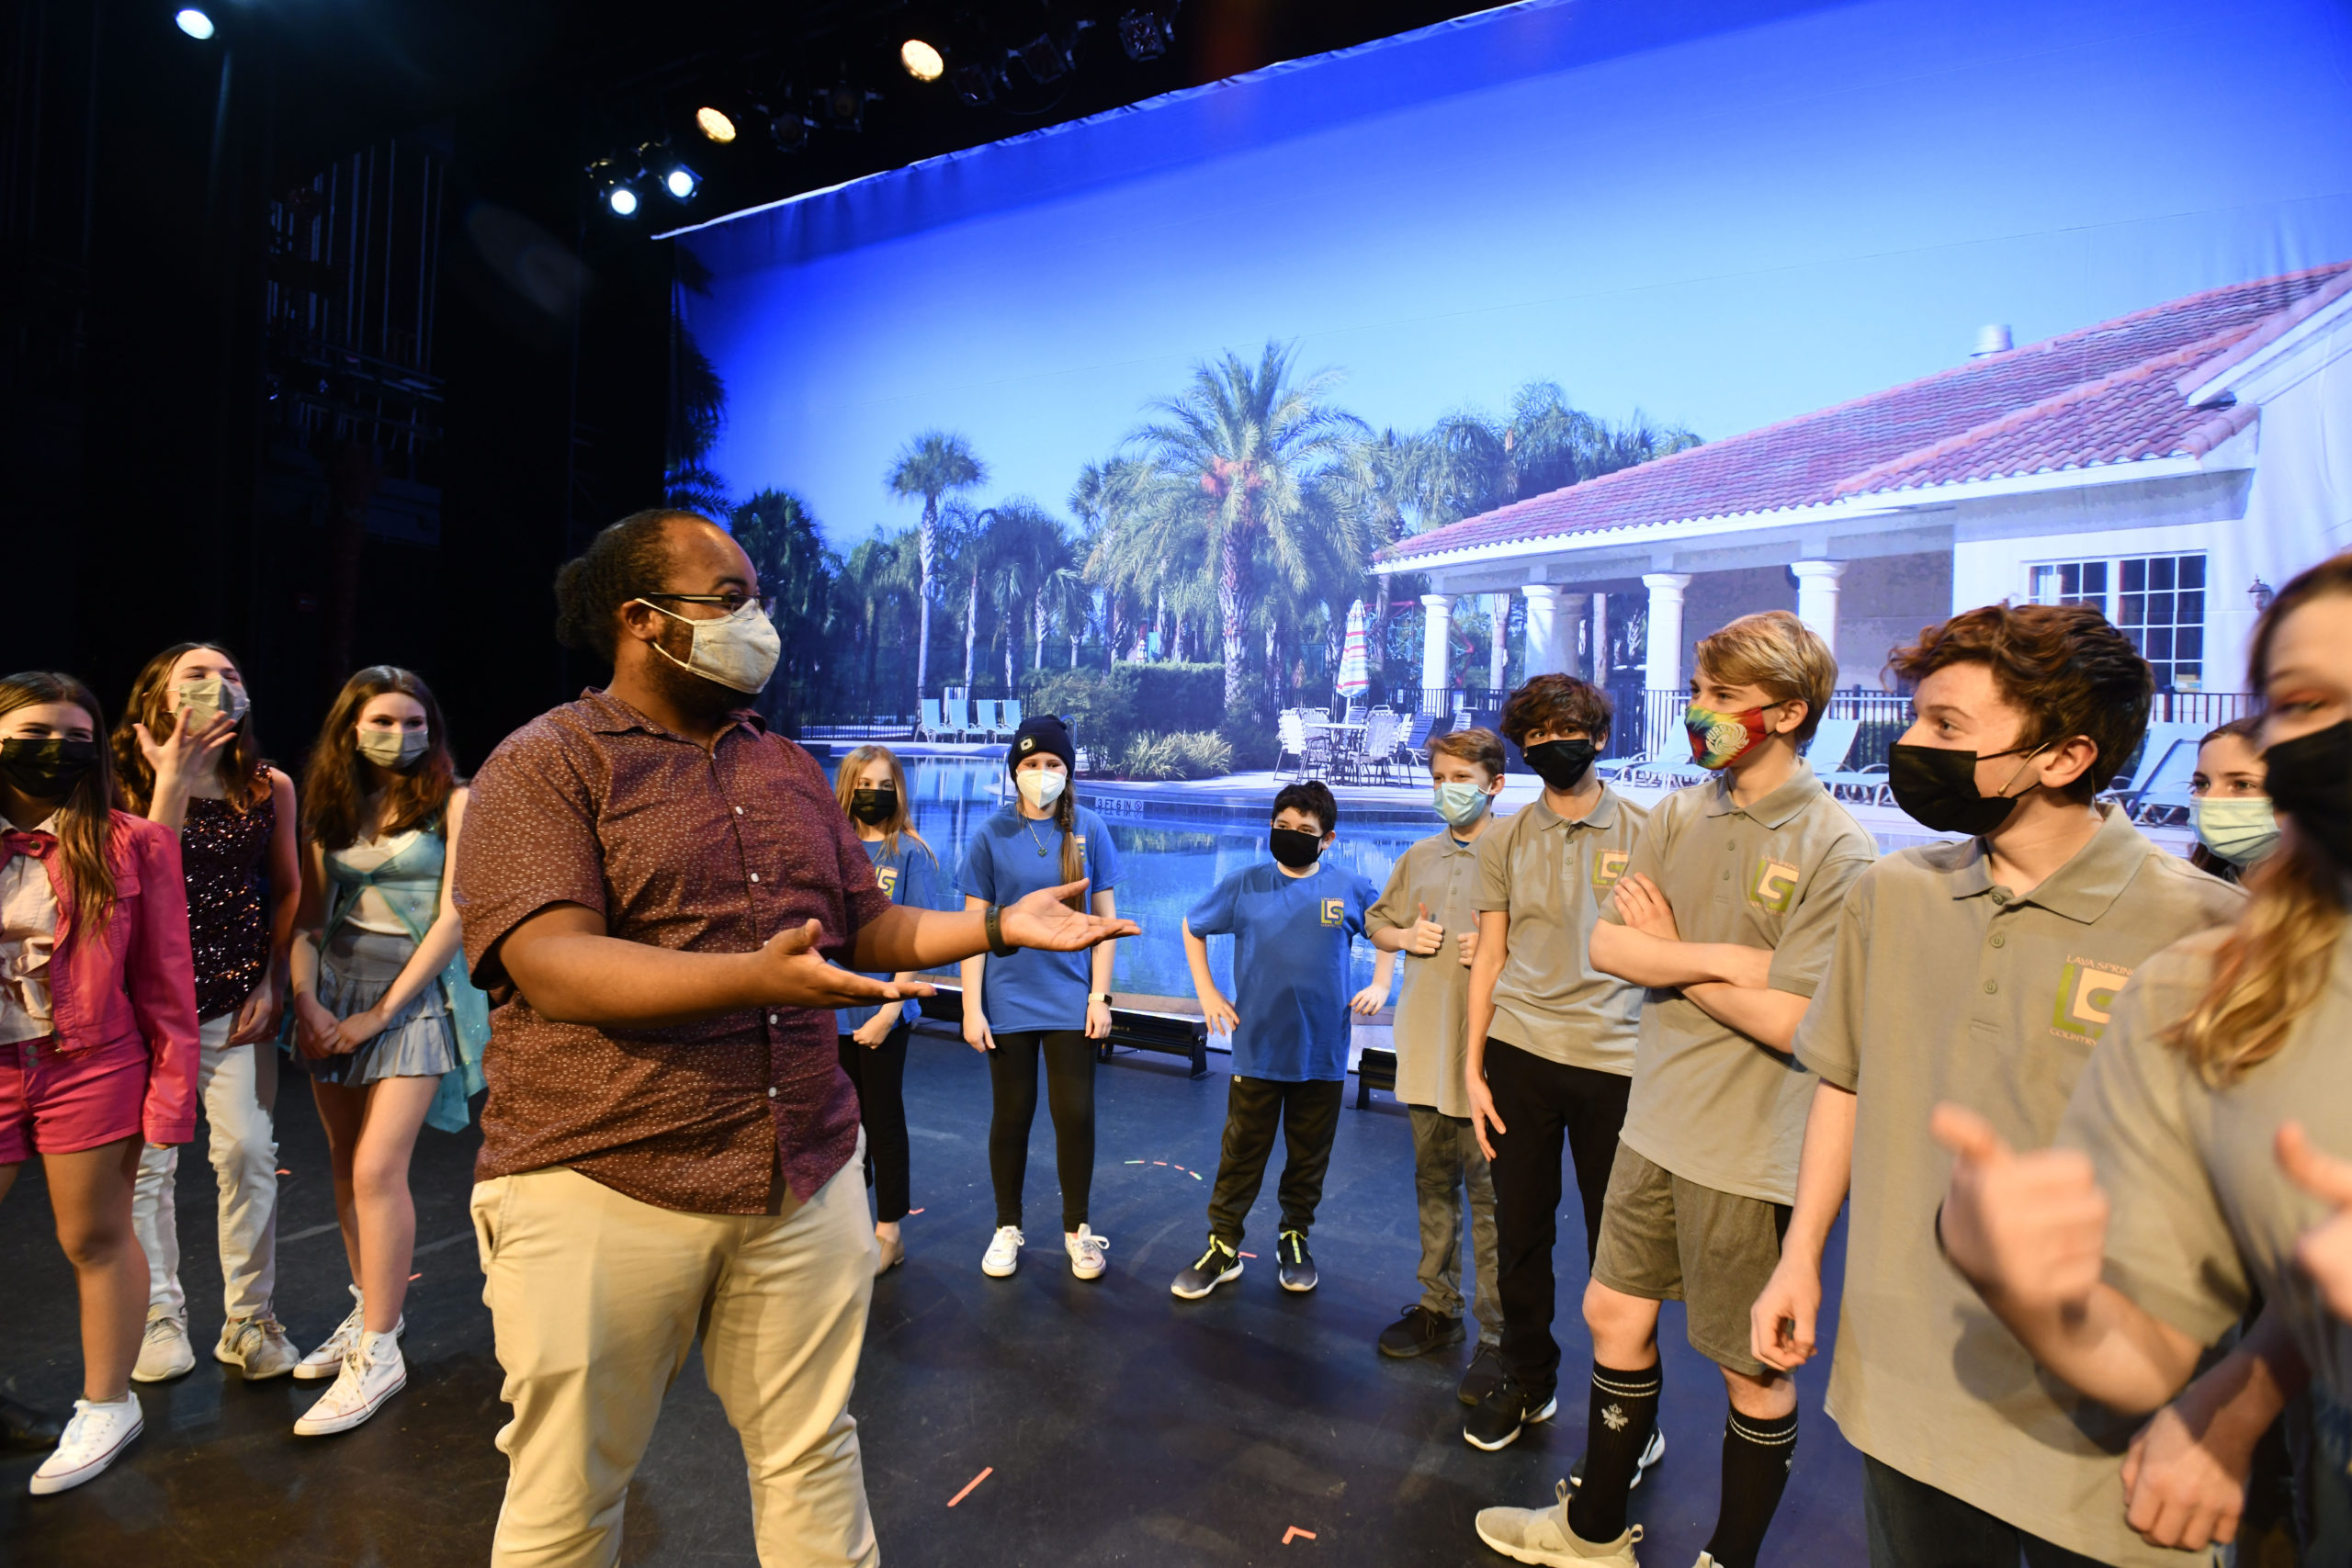 Justin Harris works with students at the Westhampton Beach Performing Arts Center for the production of “High School Musical 2.